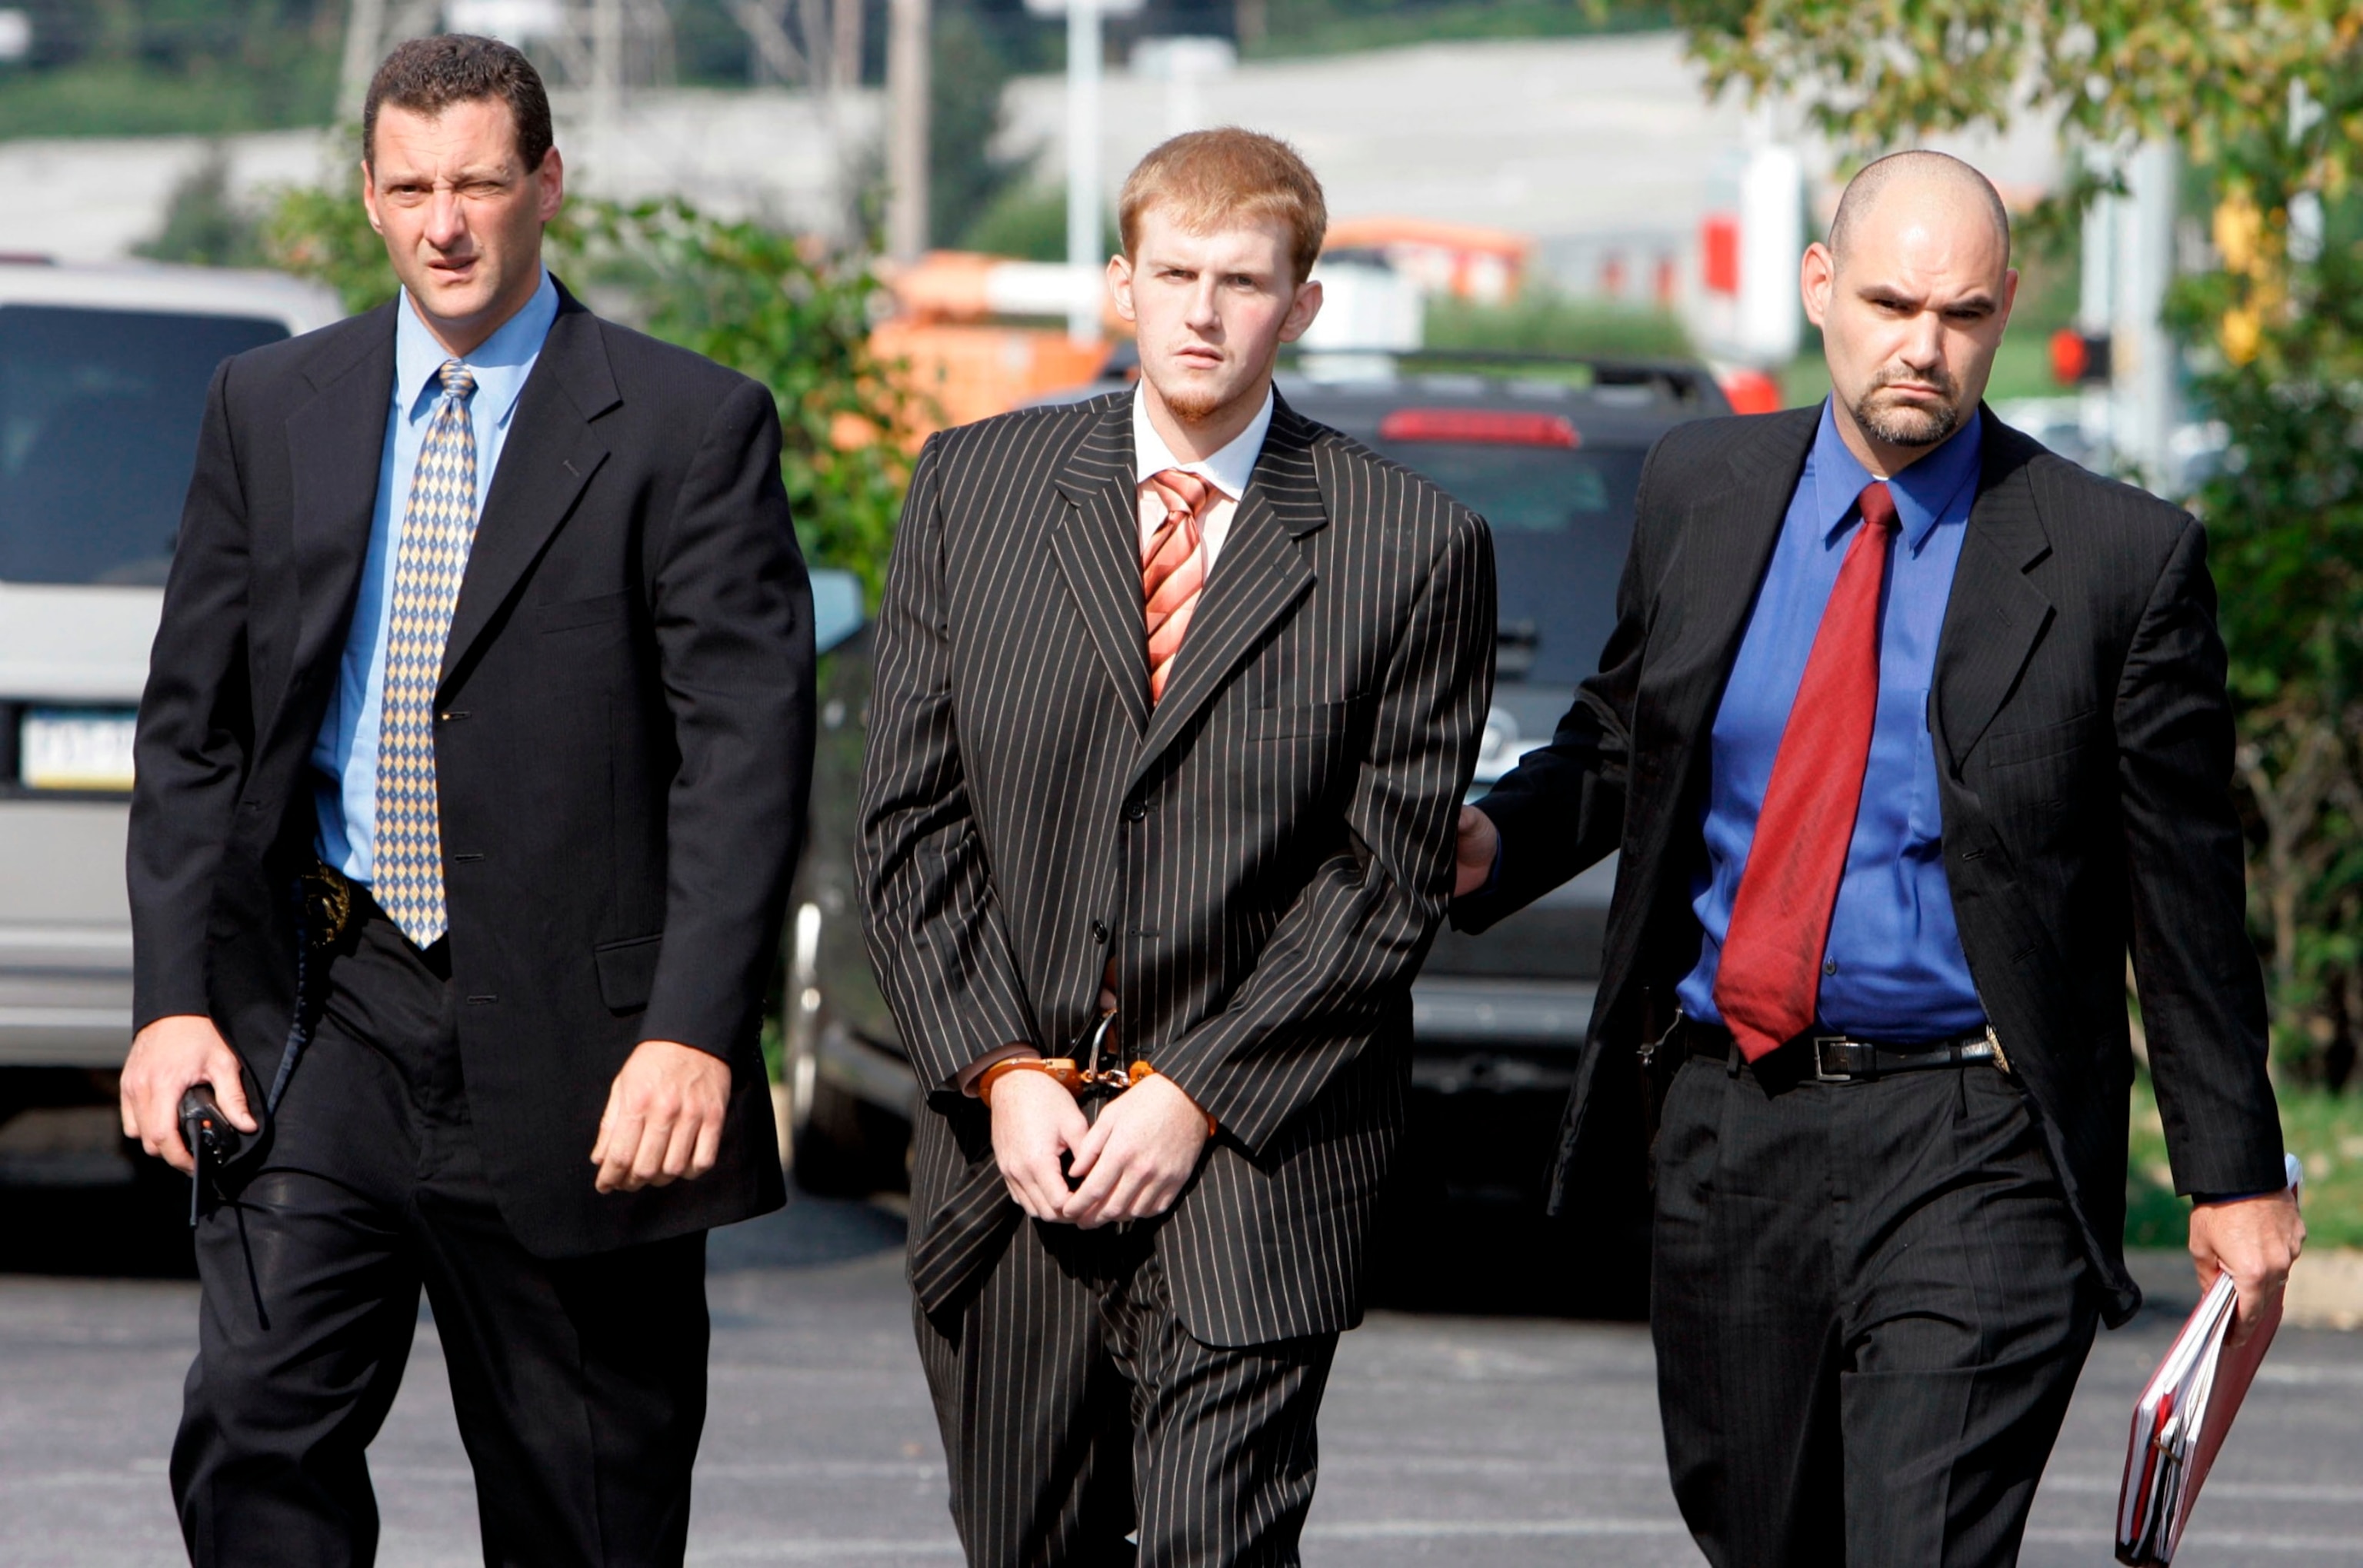 PHOTO: In this Aug. 29, 2007, file photo, former Kansas City Chiefs assistant coach Britt Reid is escorted into the Montgomery County district court house in Conshohocken, Pa. 